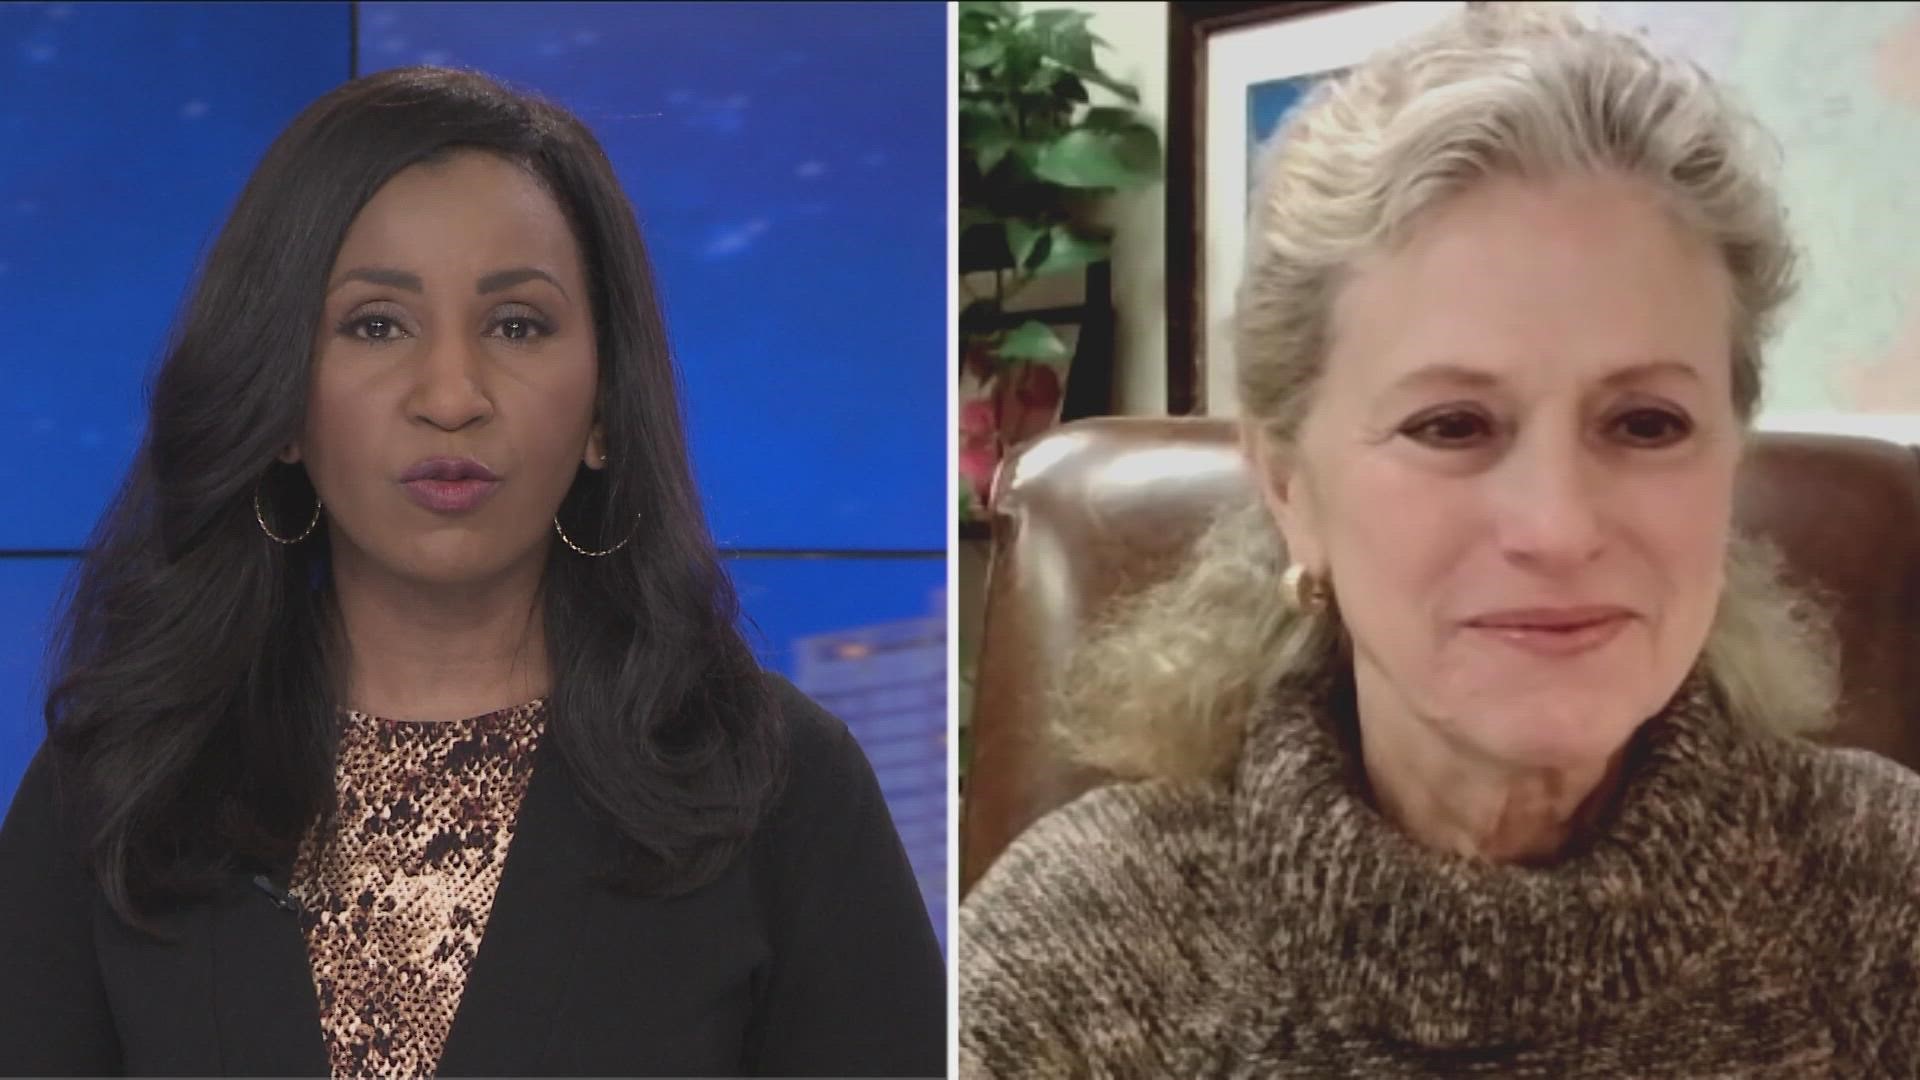 Texas State Rep. Donna Howard joined KVUE's Quita Culpepper to discuss the findings and recommendations the report made.